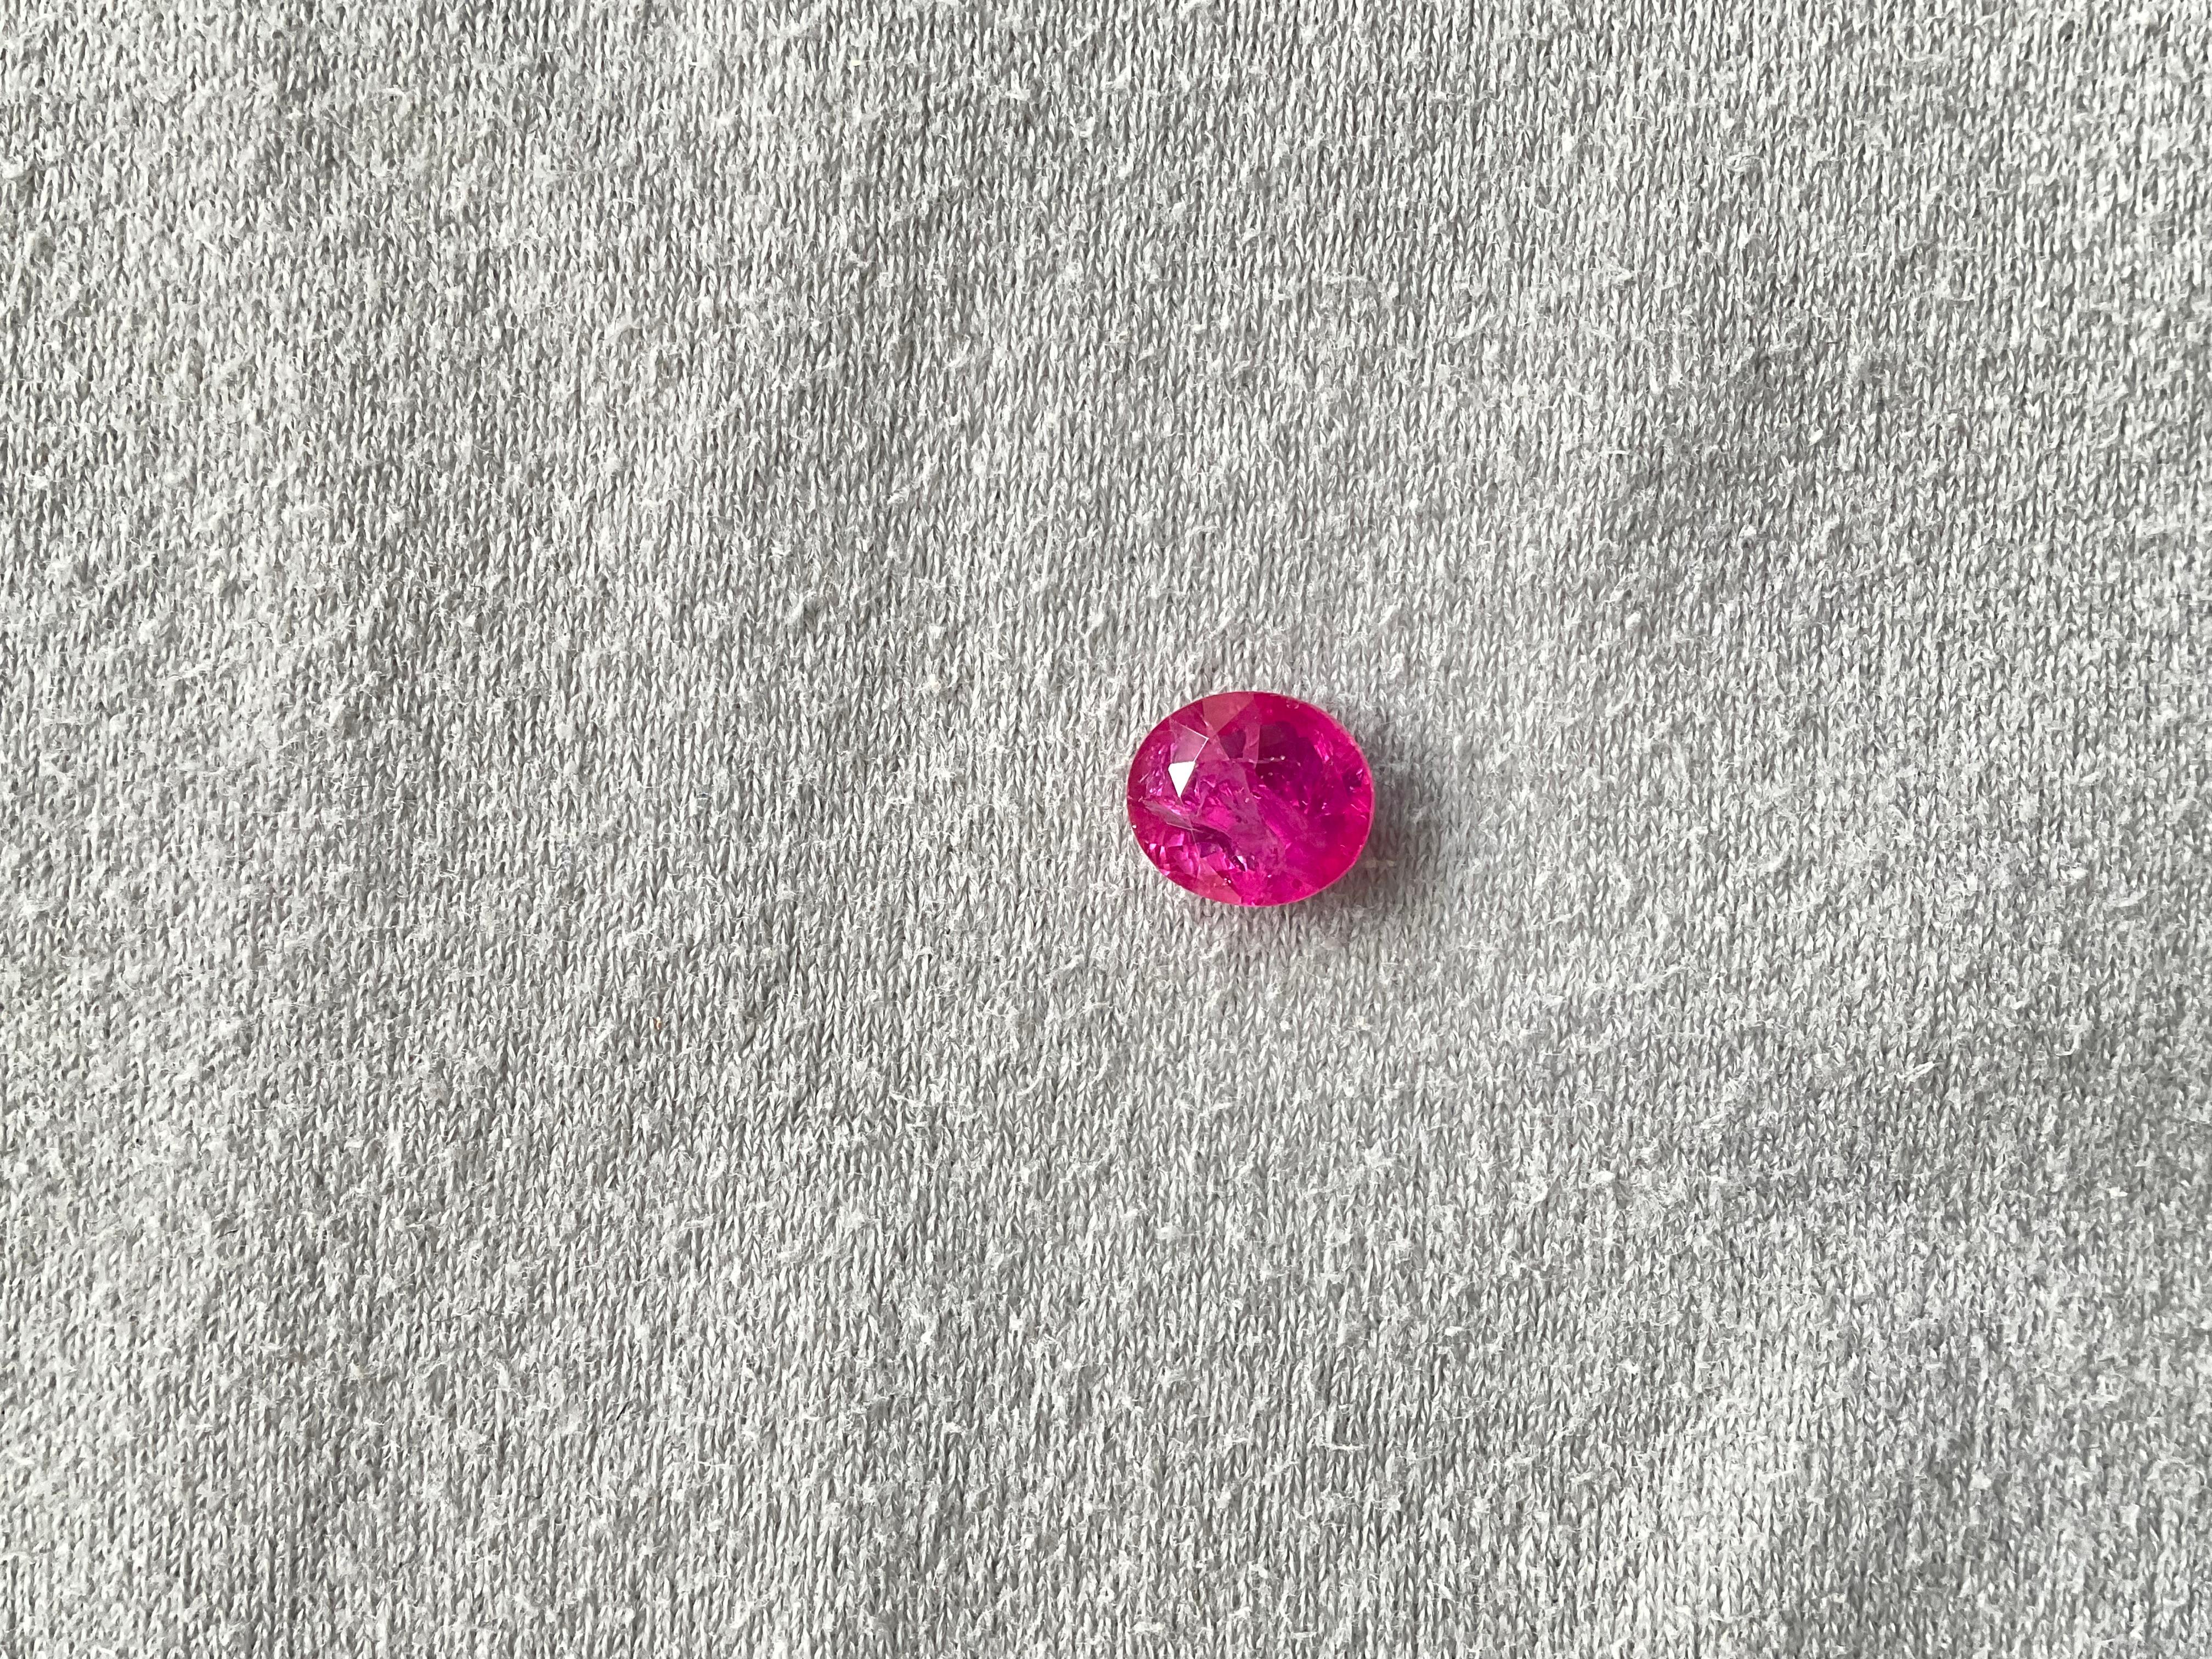 As we are auction partners at Gemfields, we have sourced these rubies from winning auctions and had cut them in our in house manufacturing responsibly.

Weight: 3.30 Carats
Size: 9.5x8x4 MM
Pieces: 1
Shape: Faceted Oval cut stone